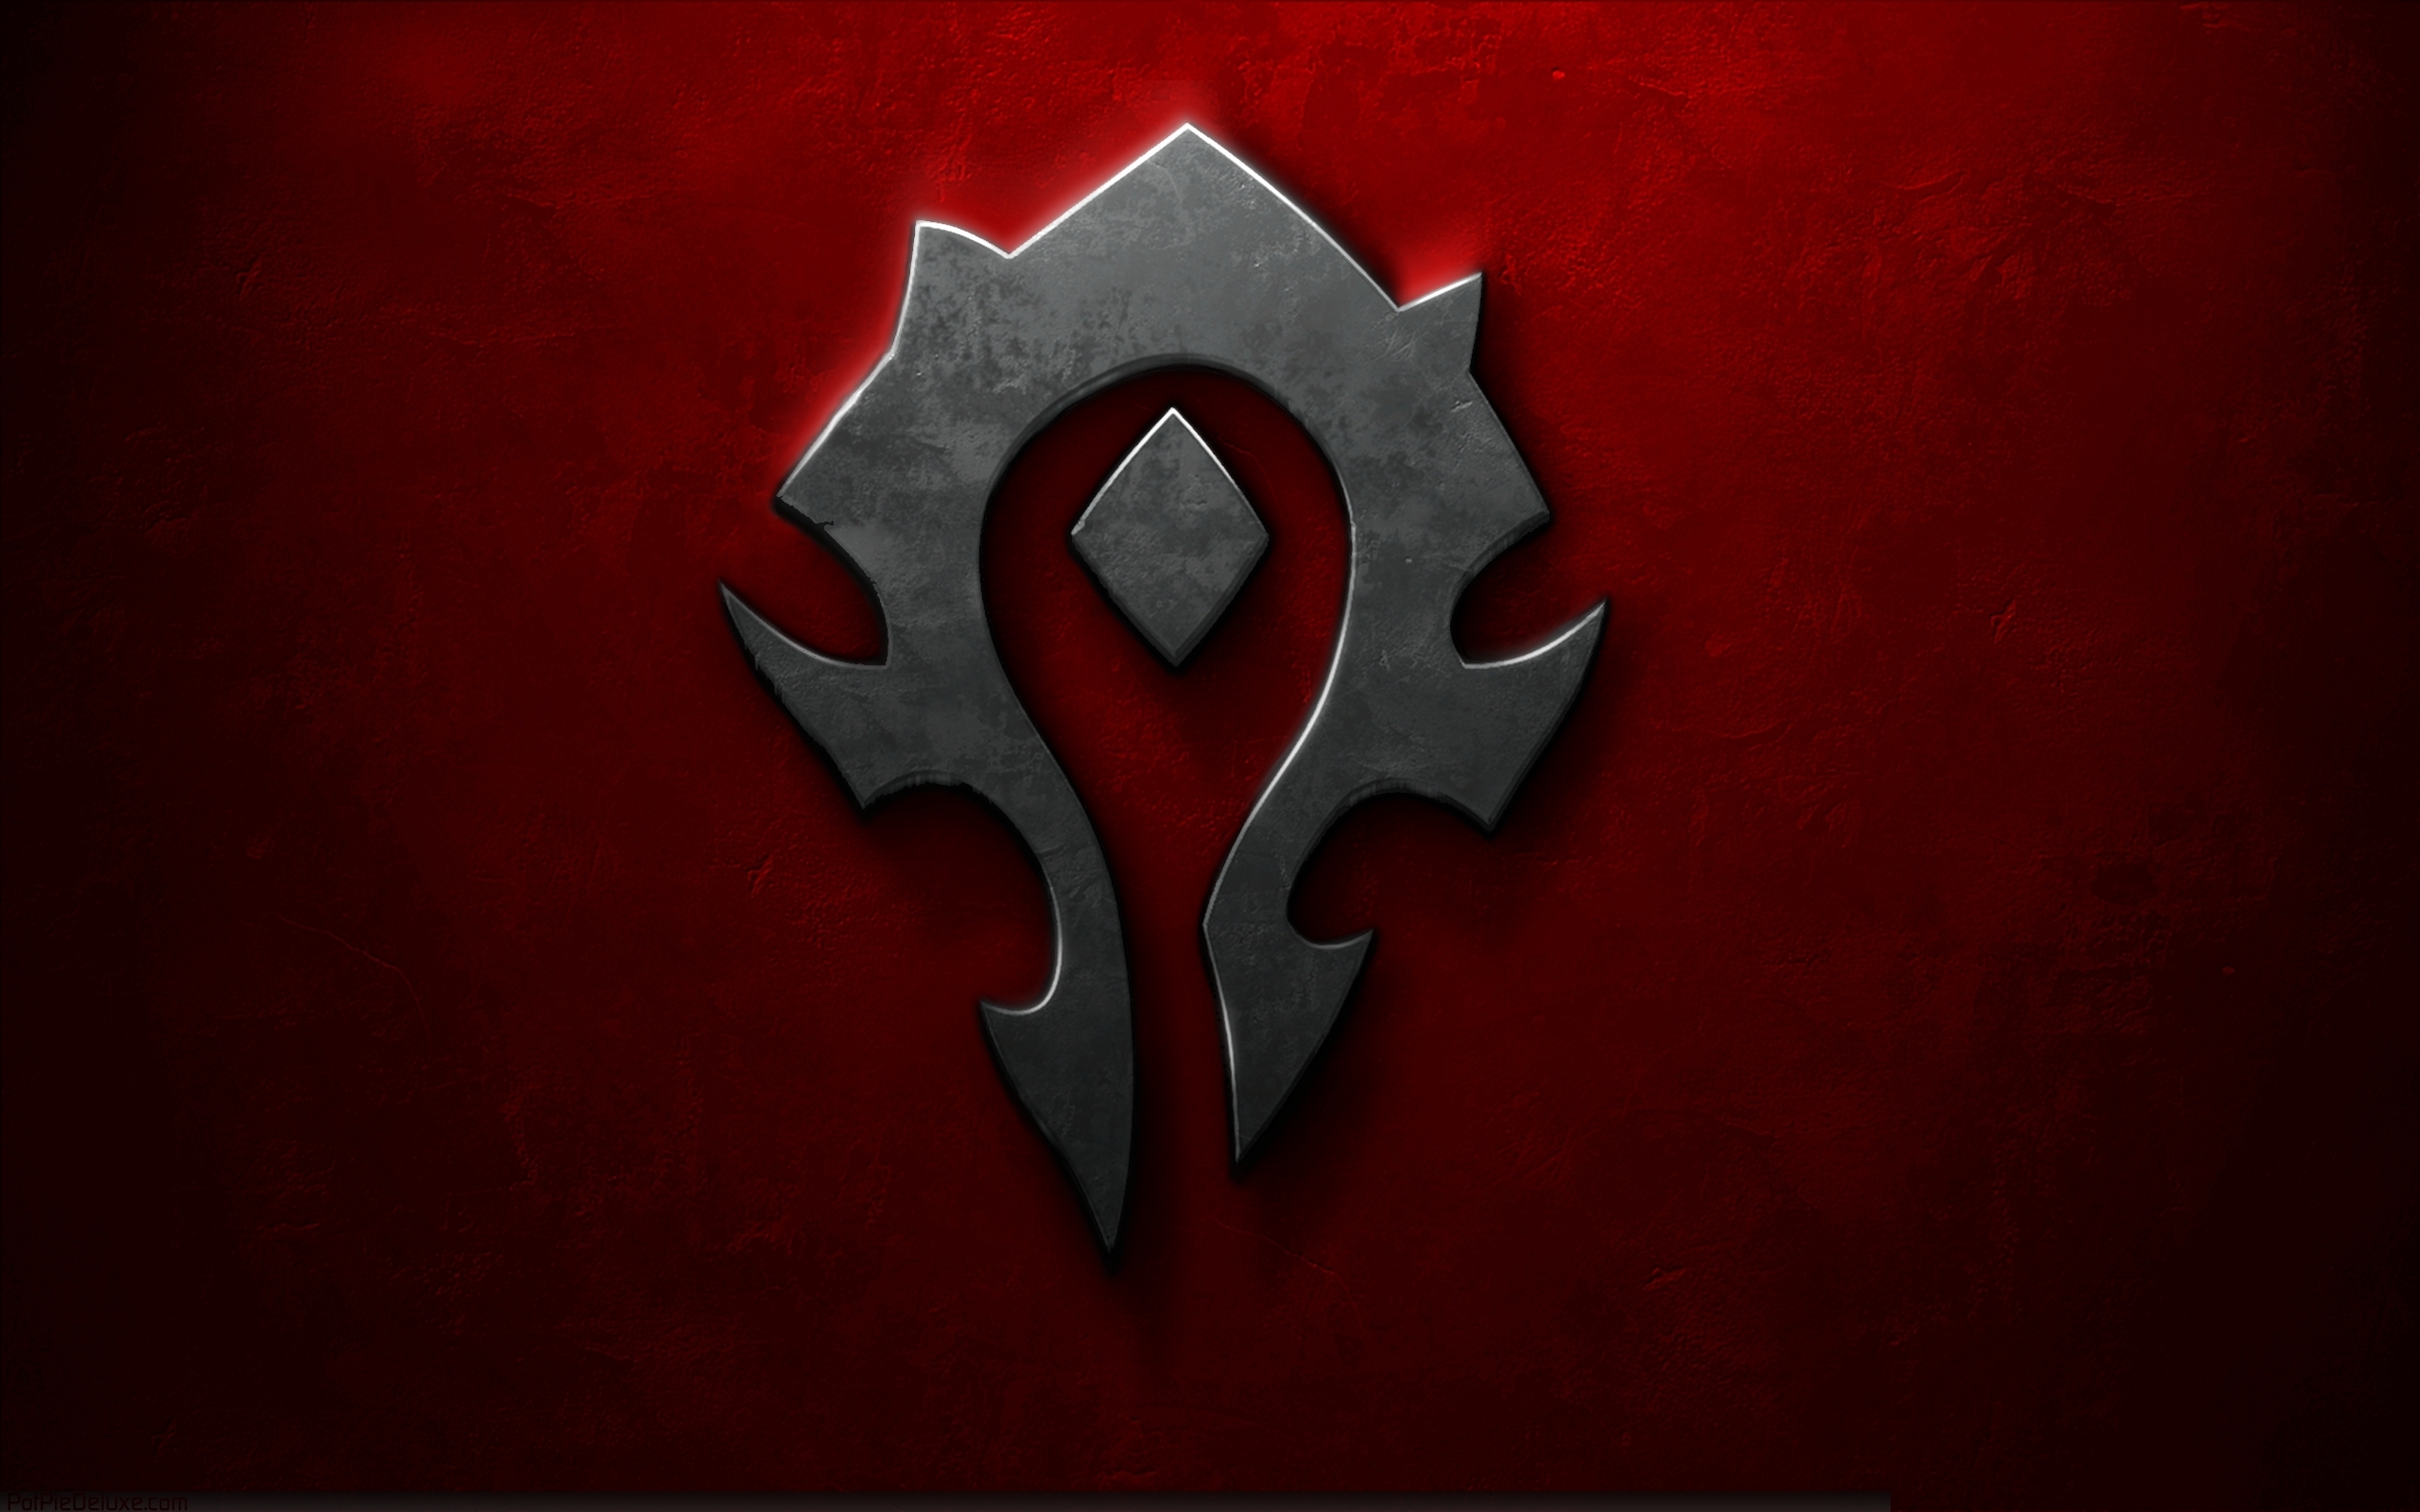 Video games world of warcraft pc horde HD Wallpapers